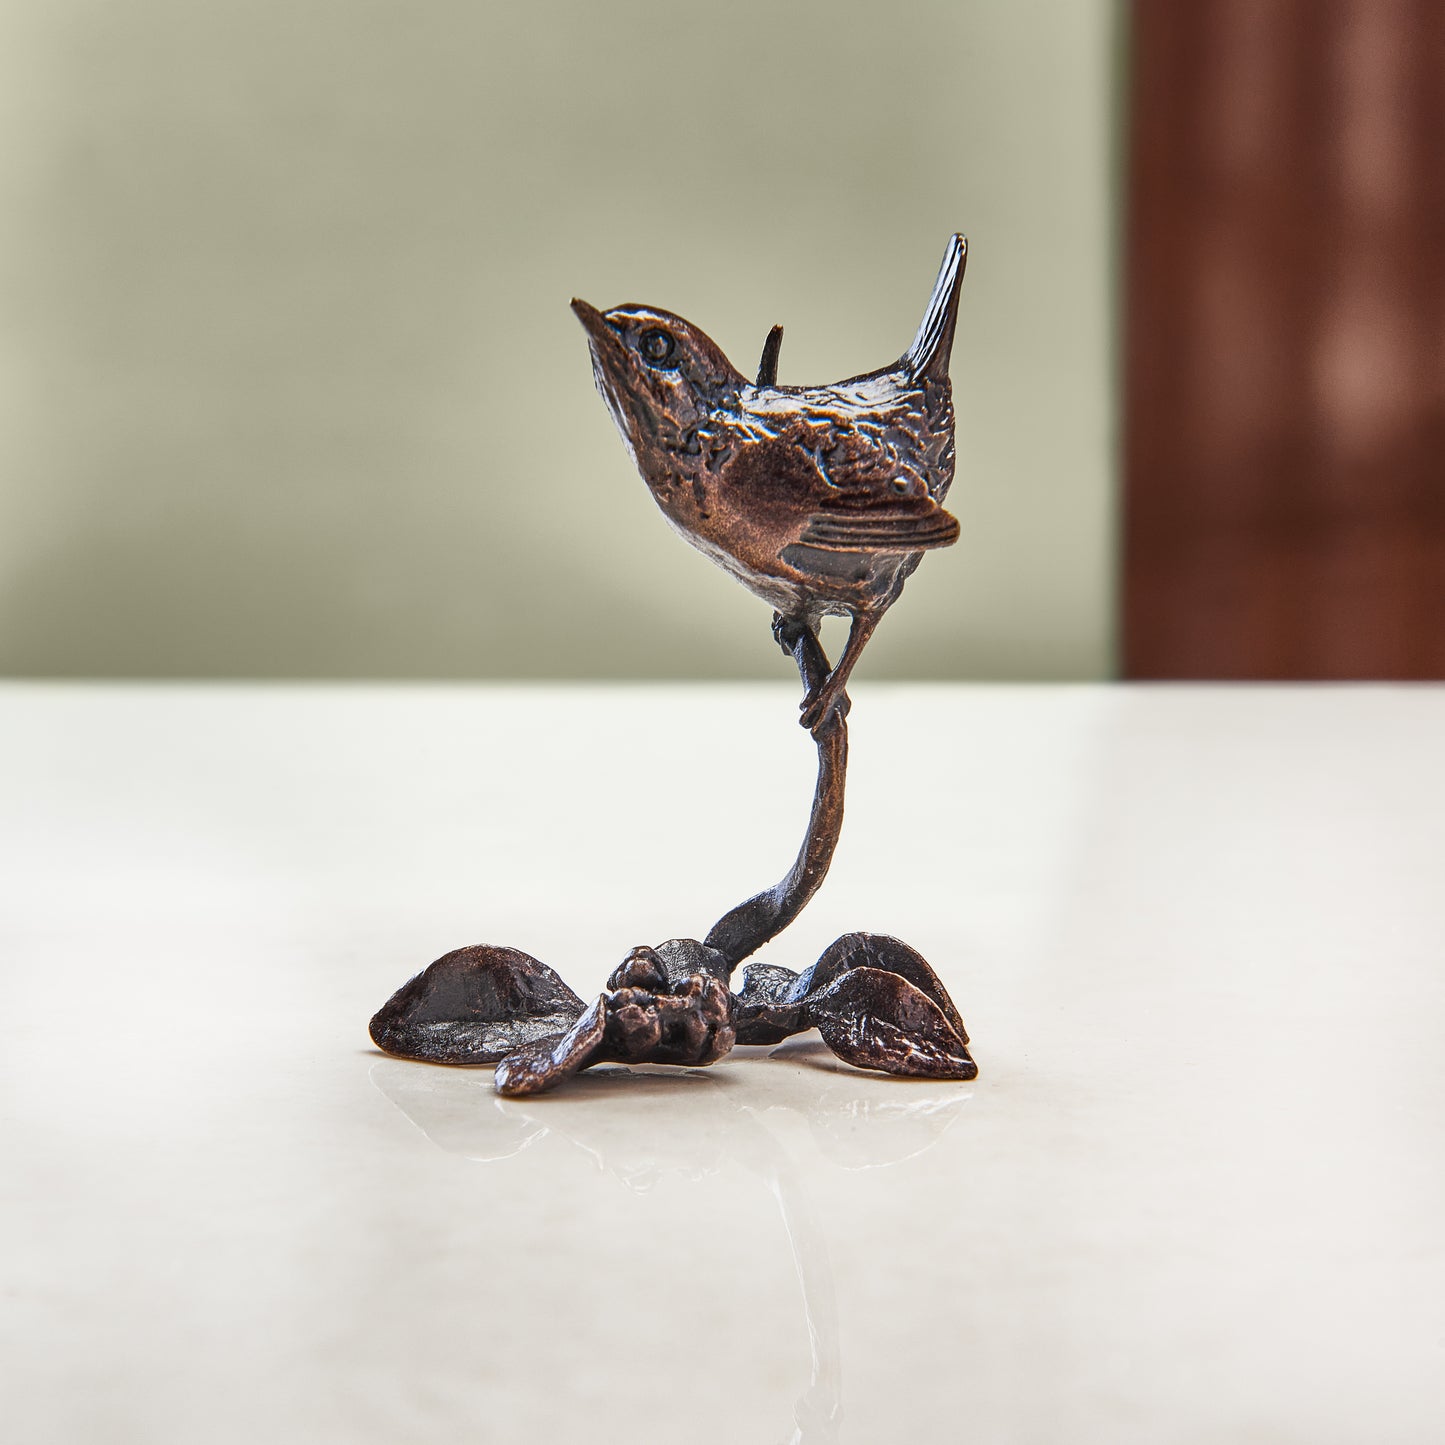 Miniature bronze figurine of a wren perched on a branch. A perfect bronze anniversary gift.